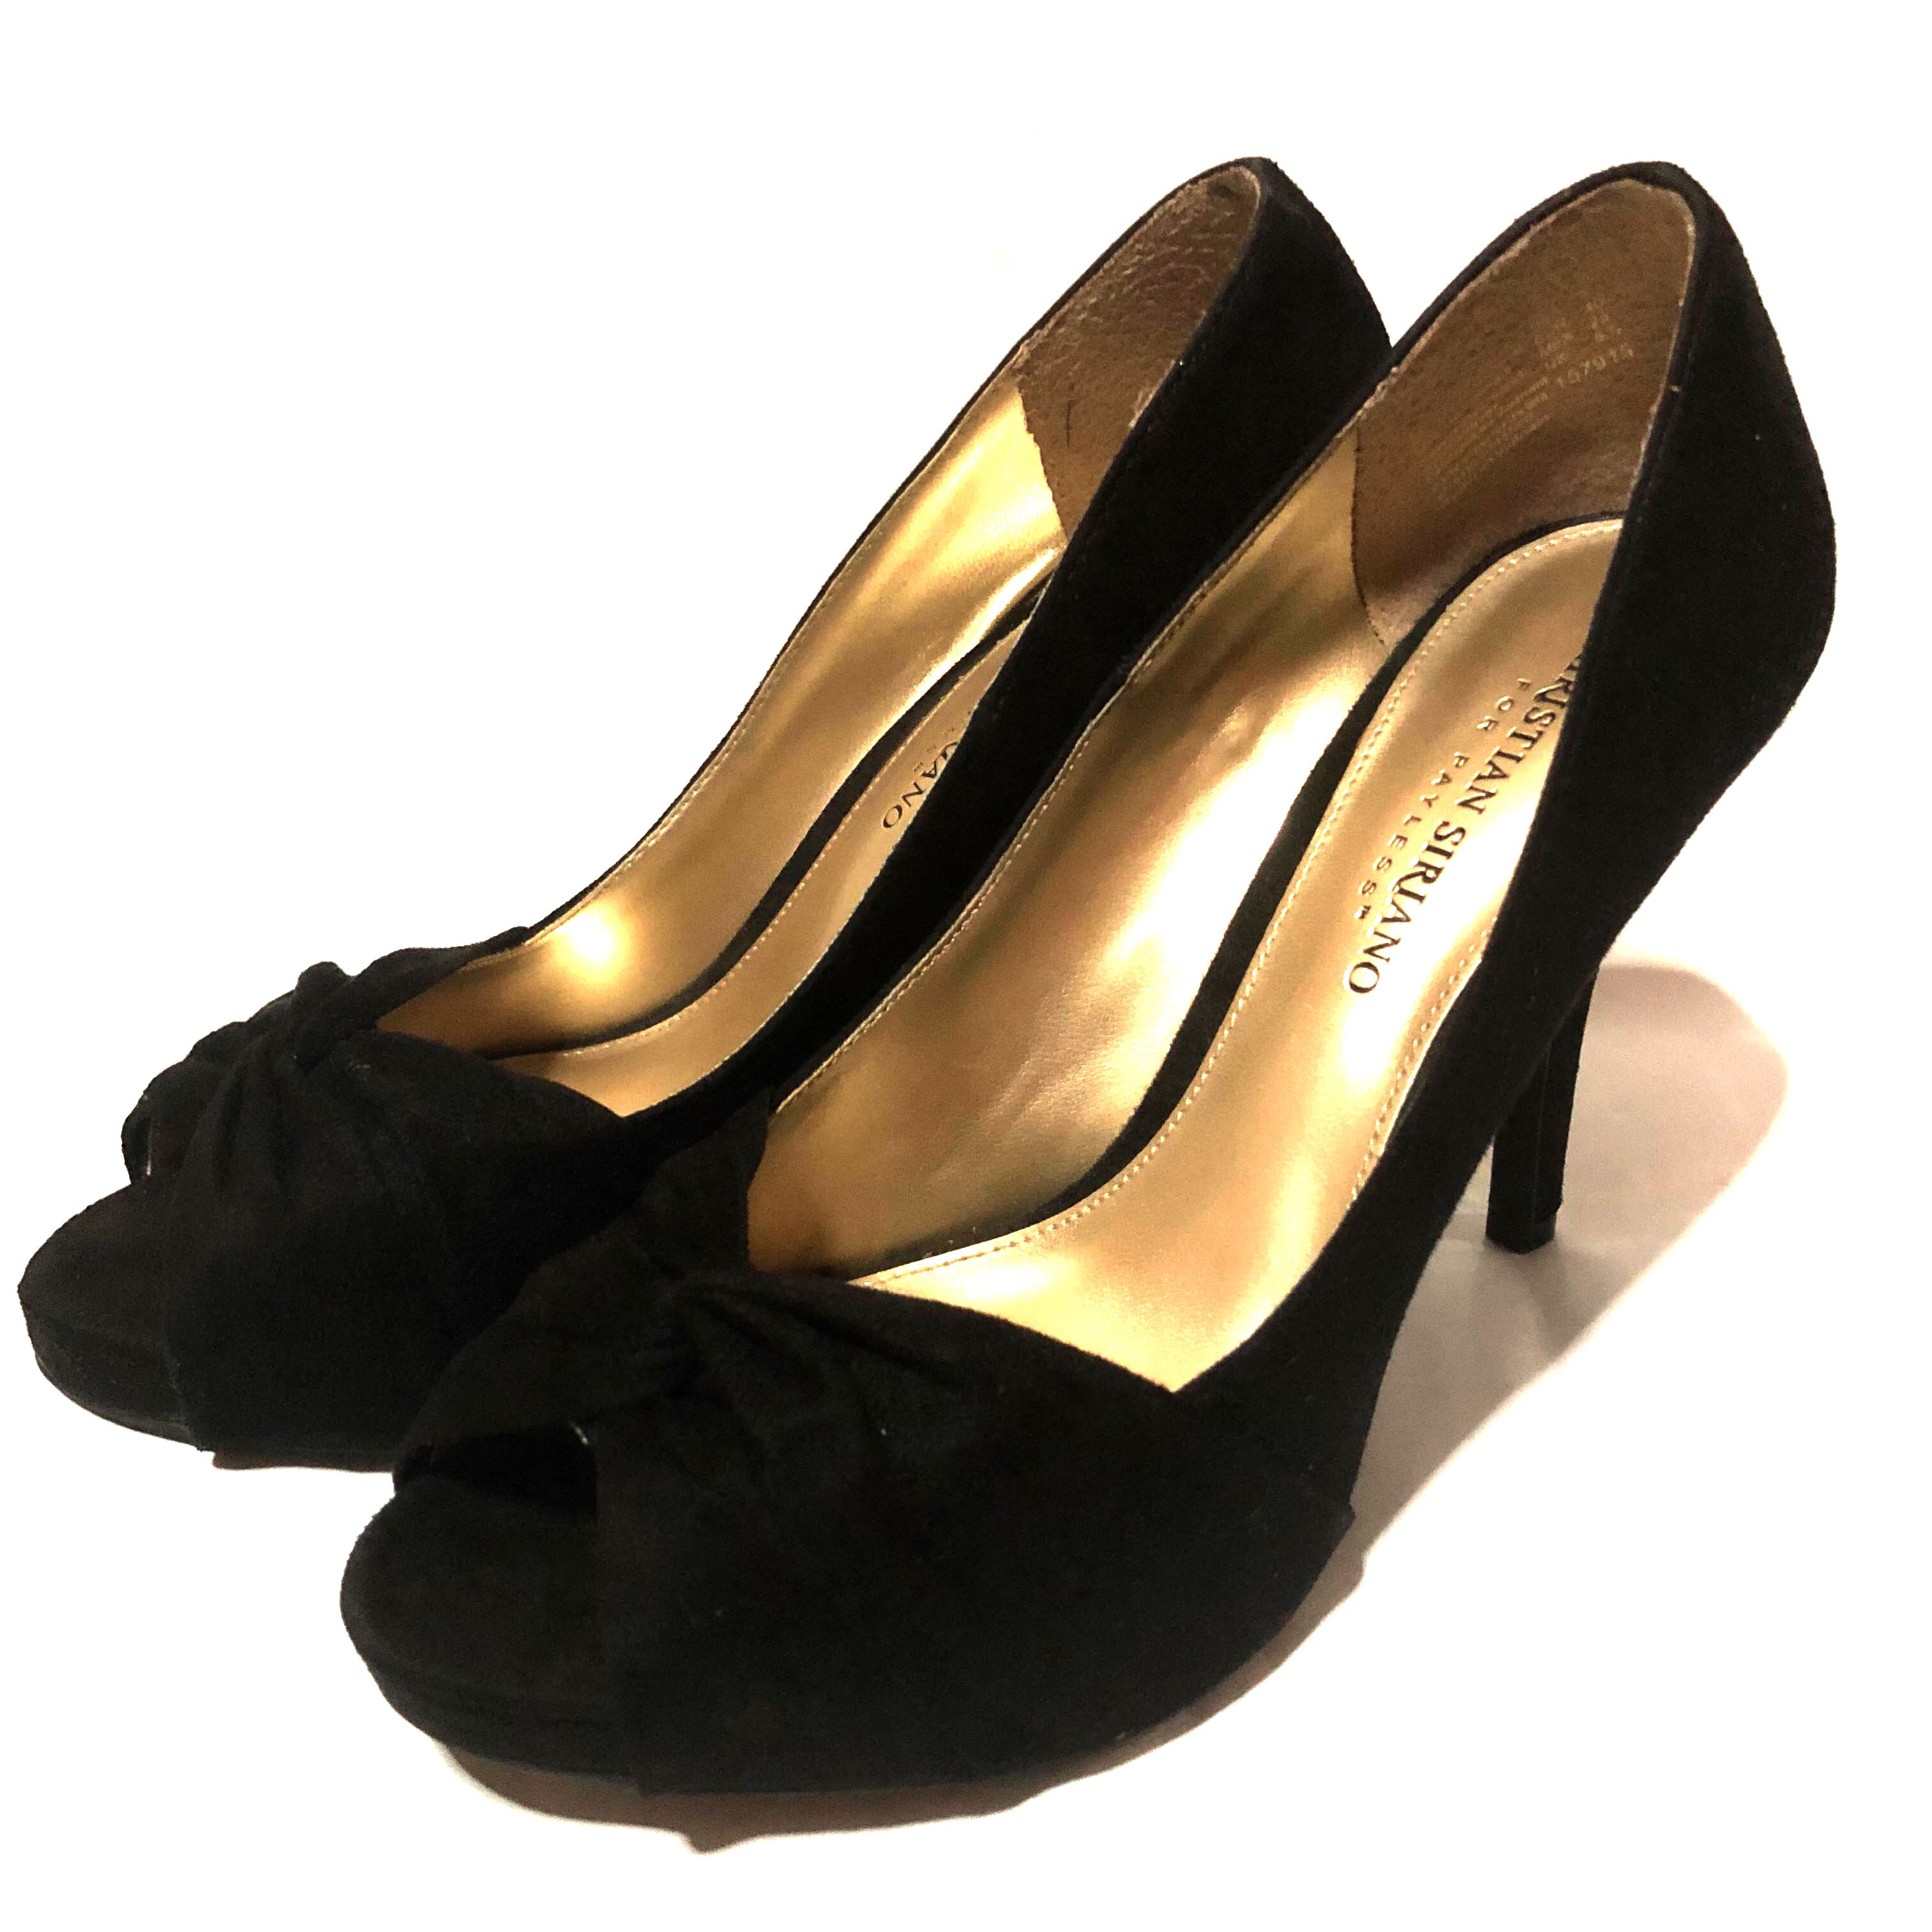 christian siriano shoes payless